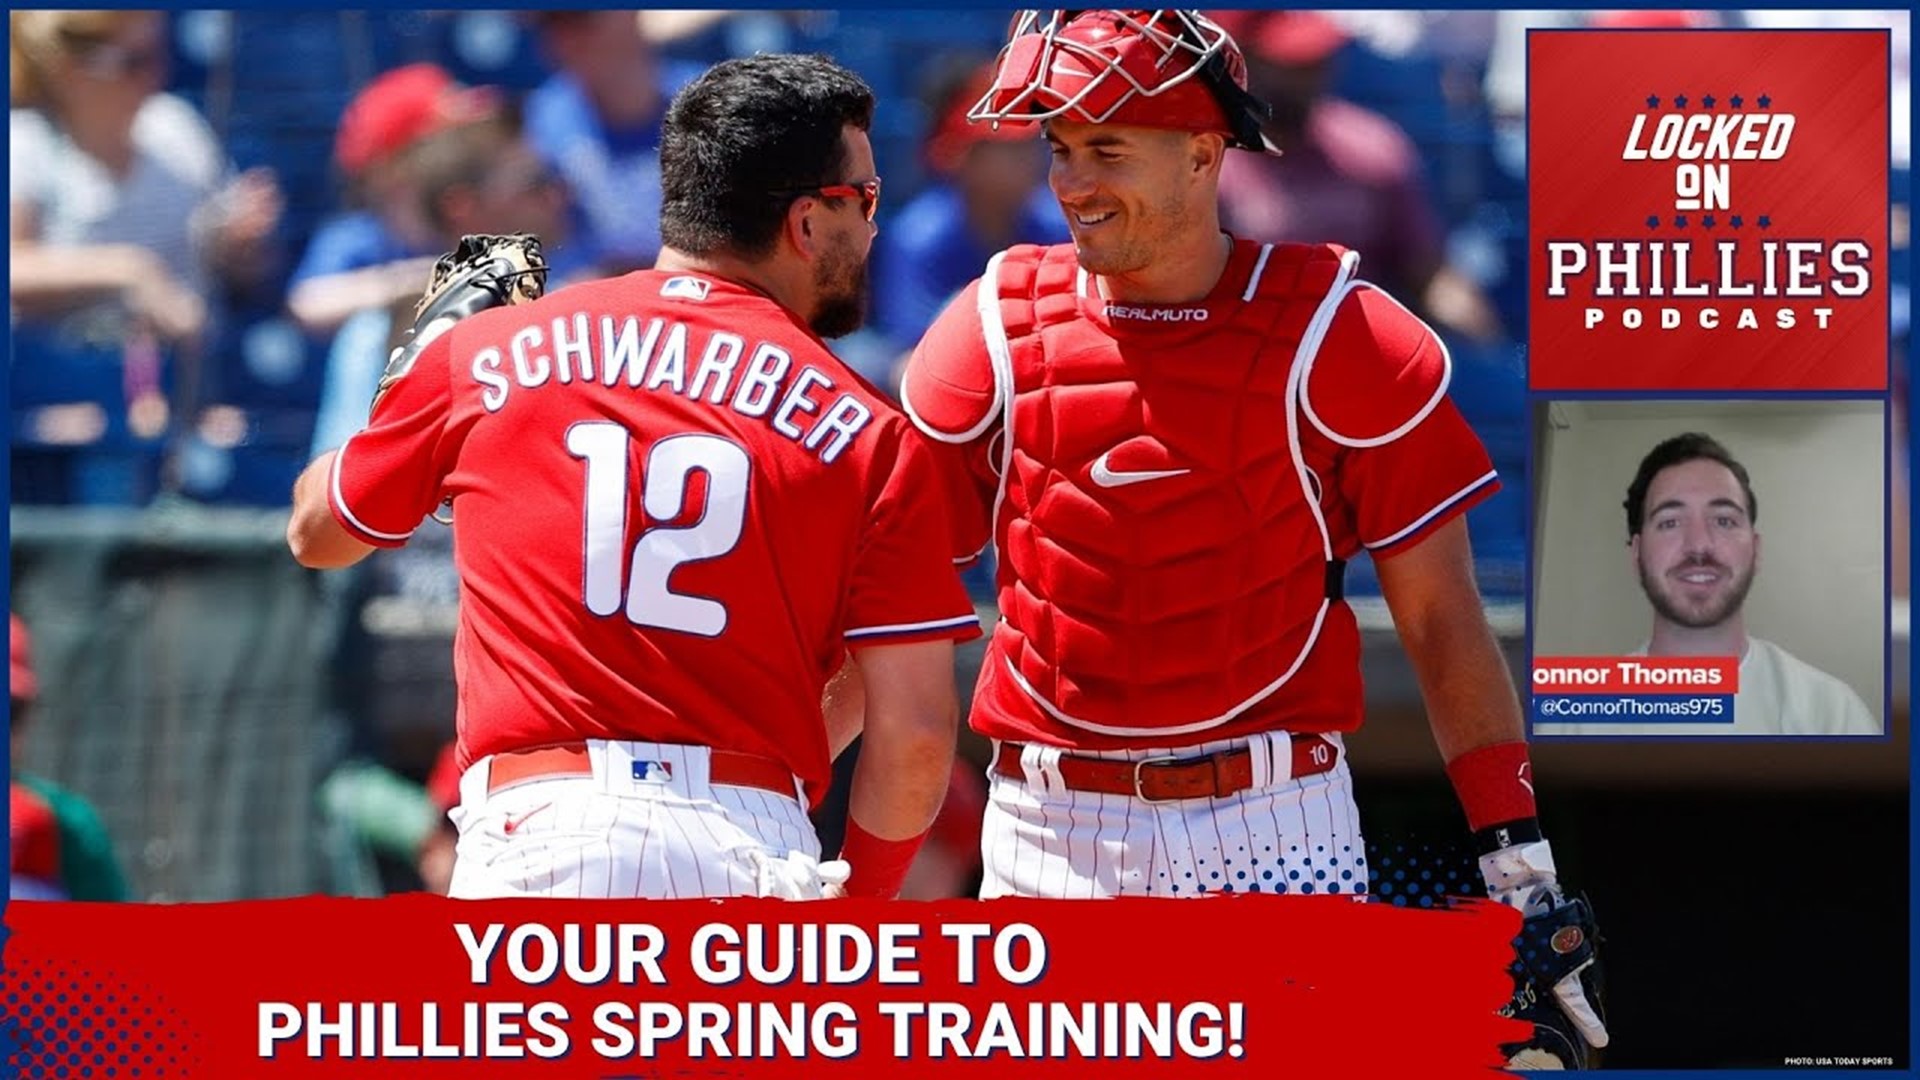 Phillies Spring Training Brings Renewed Hopes: Philly Sports